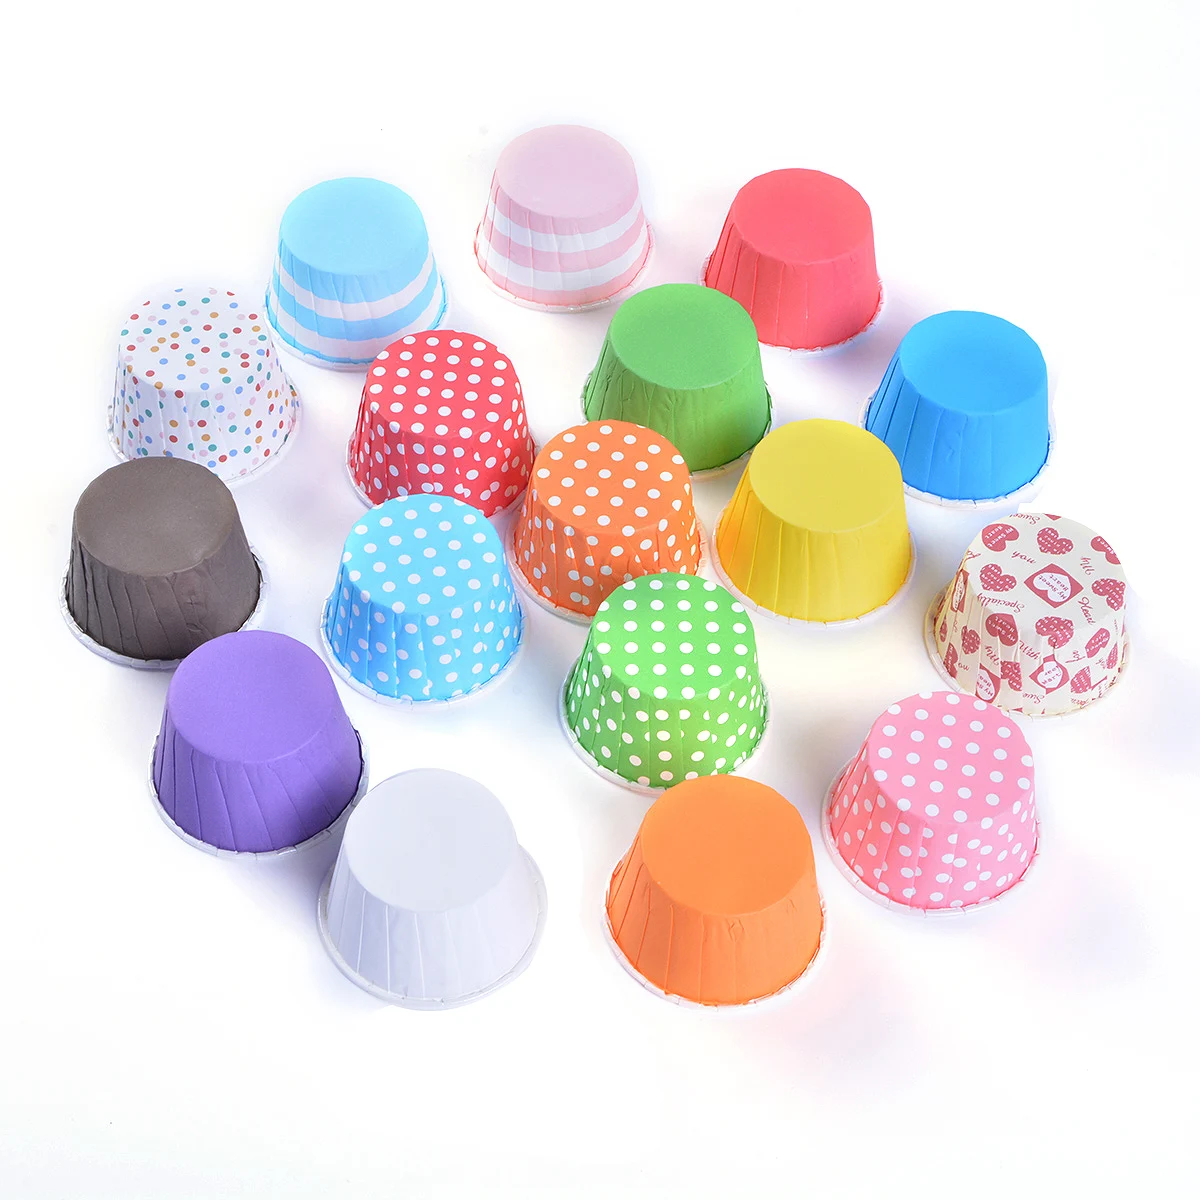 

50pcs Large Cupcake Paper Cups Oilproof Cupcake Liner Baking Cup Tray Case Wedding Party Caissettes Golden Muffin Wrapper Paper